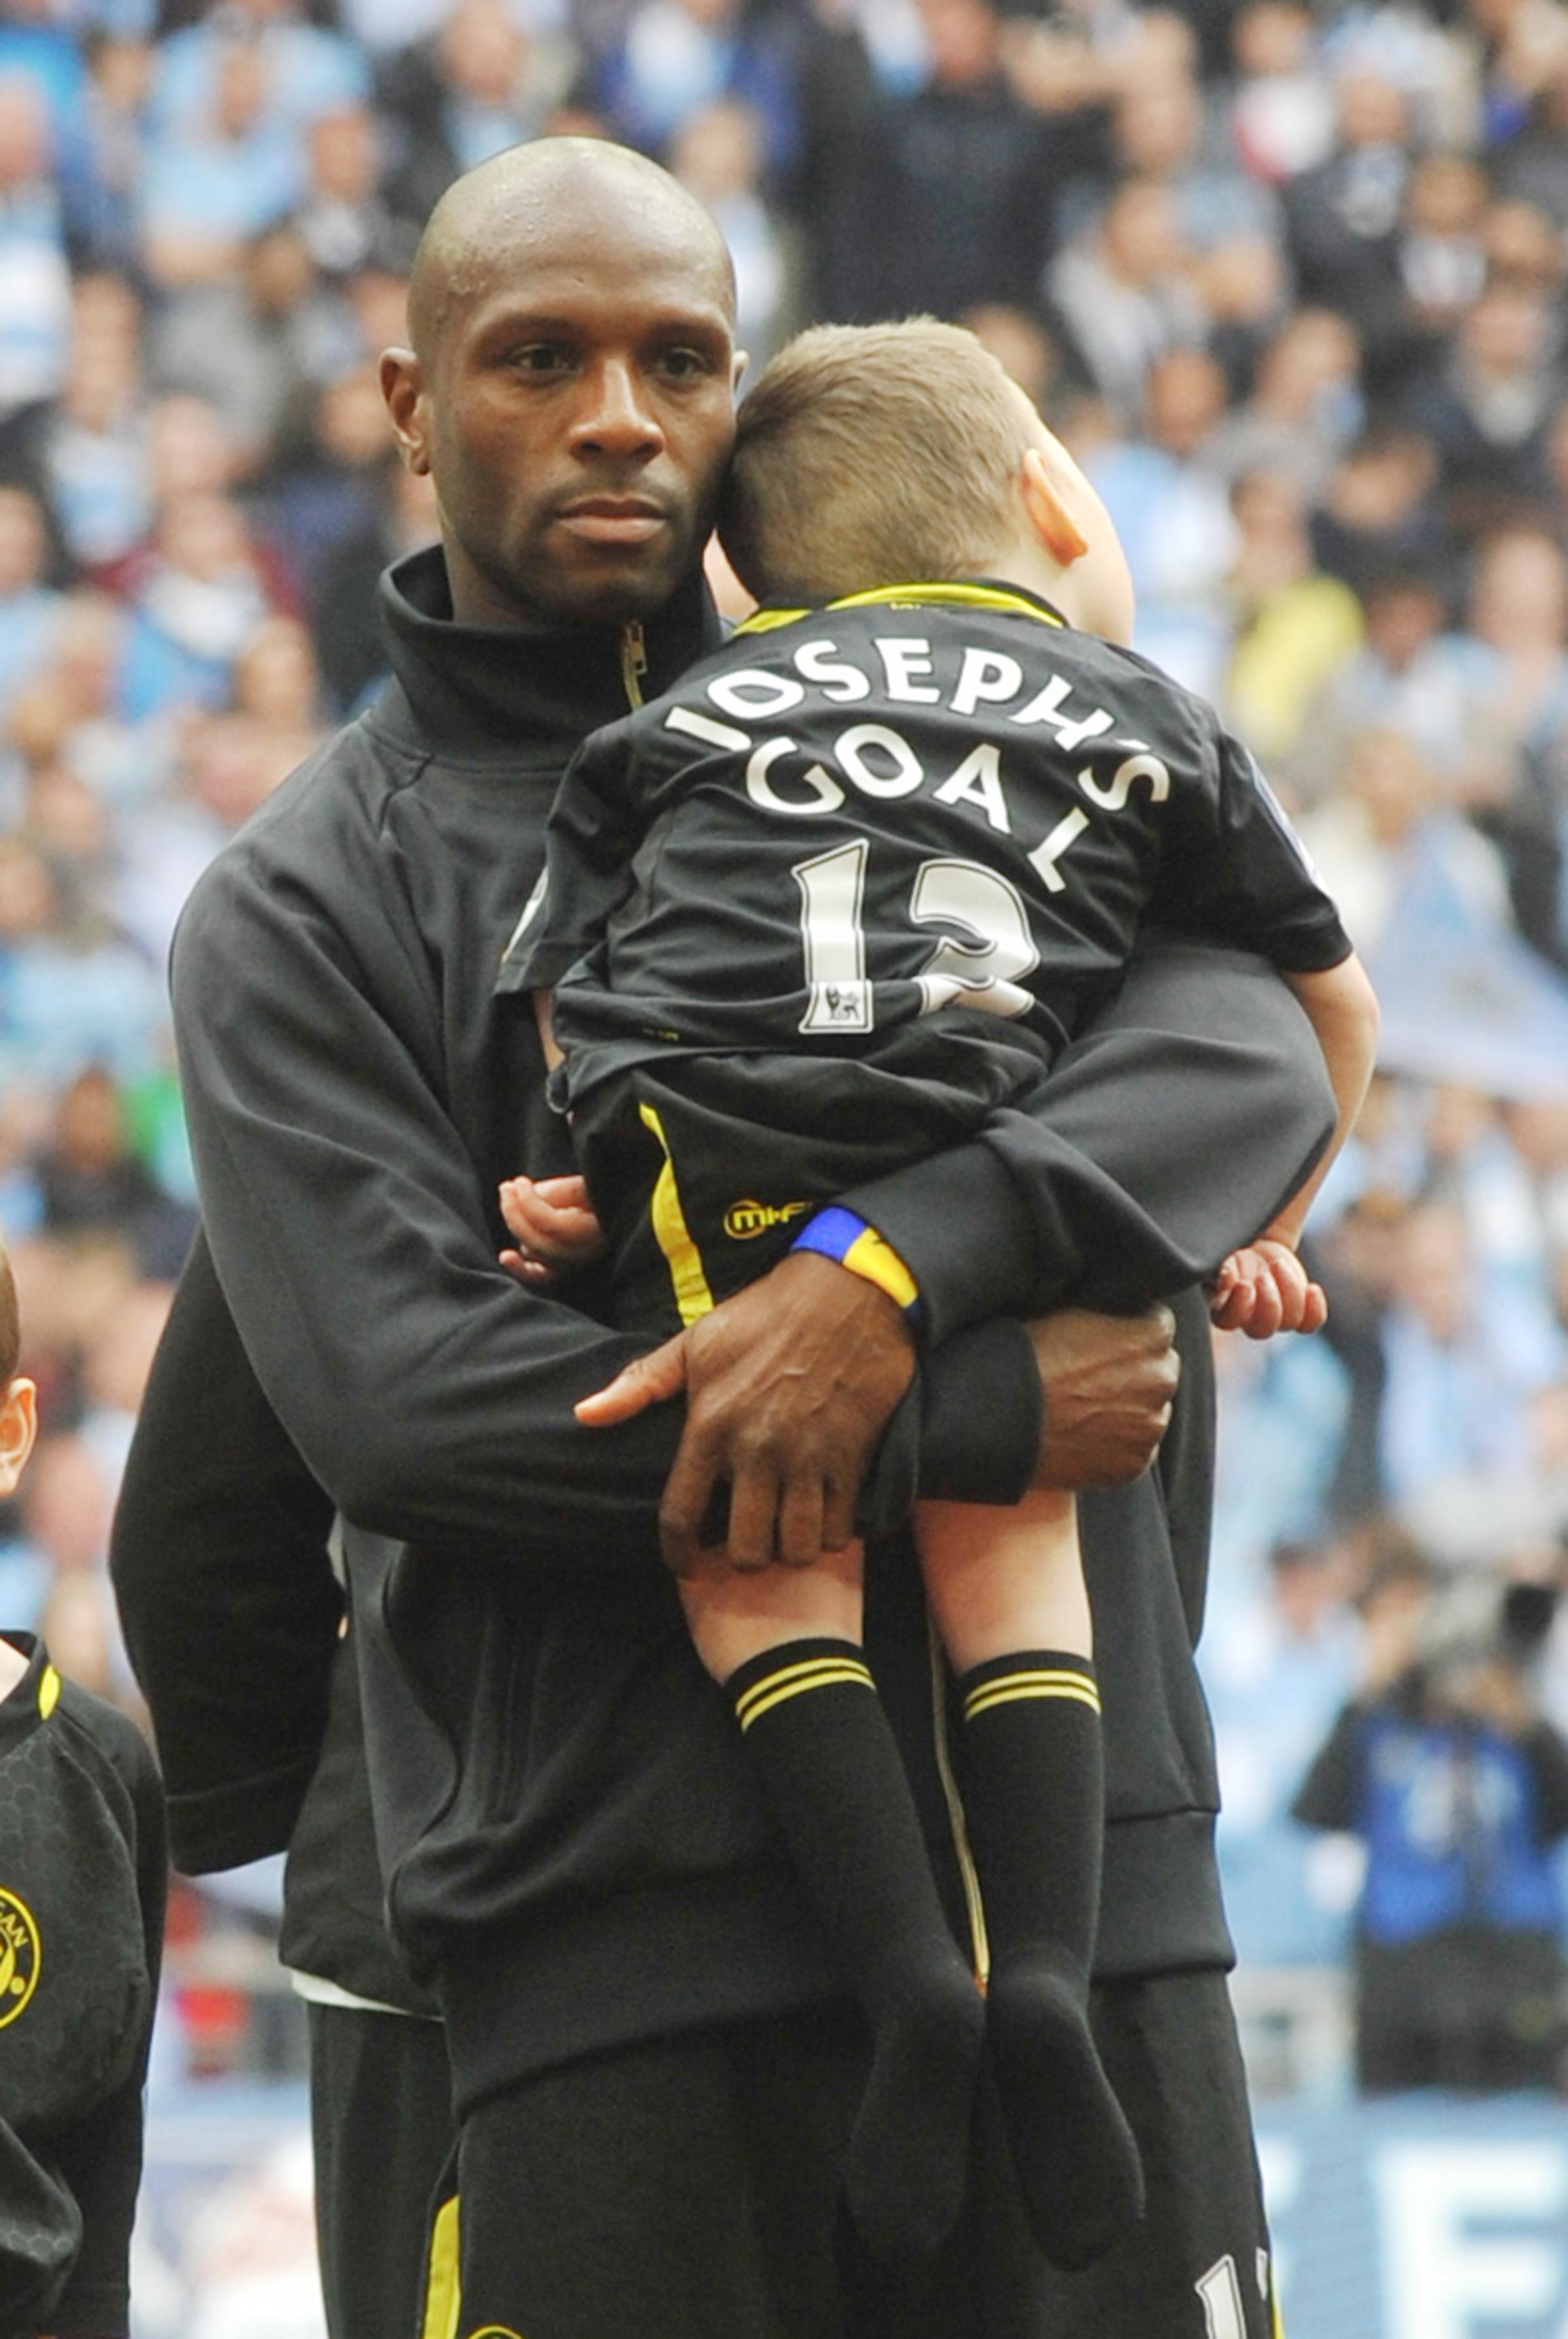 Handout photo issued by Josephs Goal of Joe Kendrick, a 10-year-old from Wigan with a rare life-limiting genetic disorder called nonketotic hyperglycinemia (NKH) with Wigan captain Emmerson Boyce at the 2013 FA Cup final, as amateur runner Chris Devine